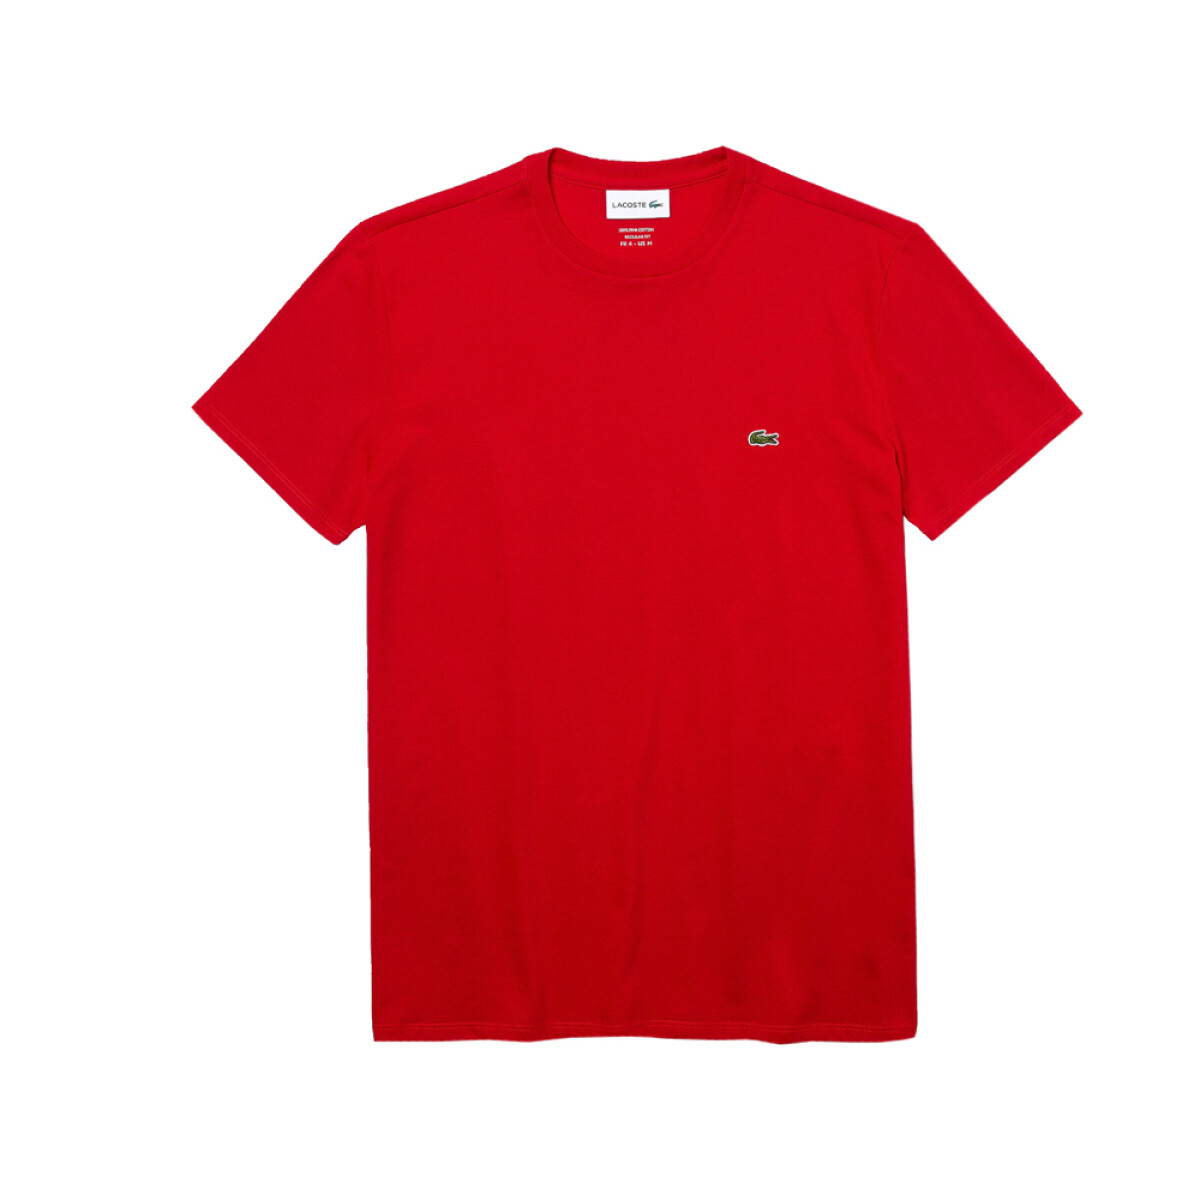 TEE SHIRT LACOSTE - Red 